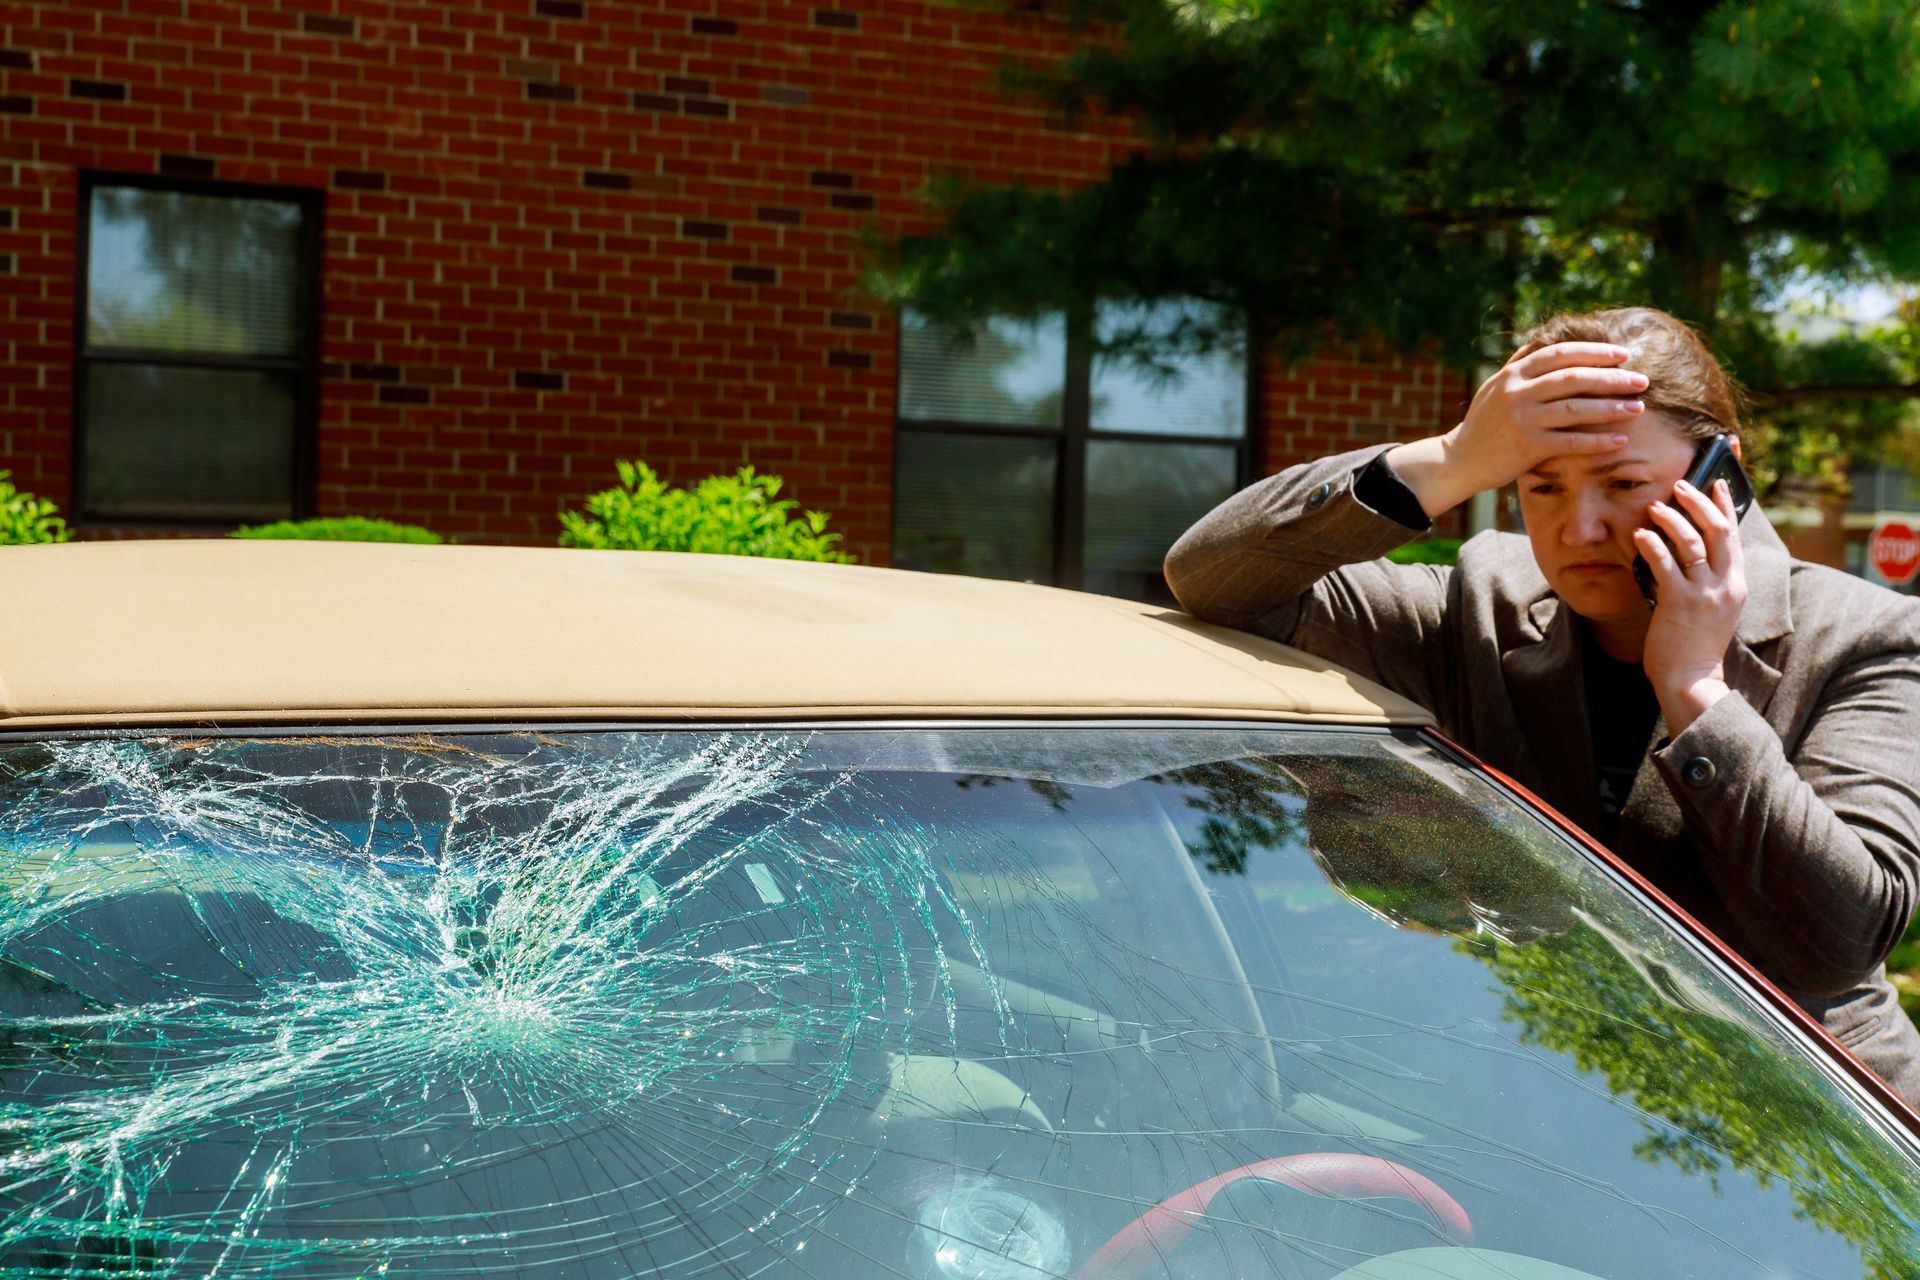 A woman is sitting in a car with a broken windshield talking on a cell phone.